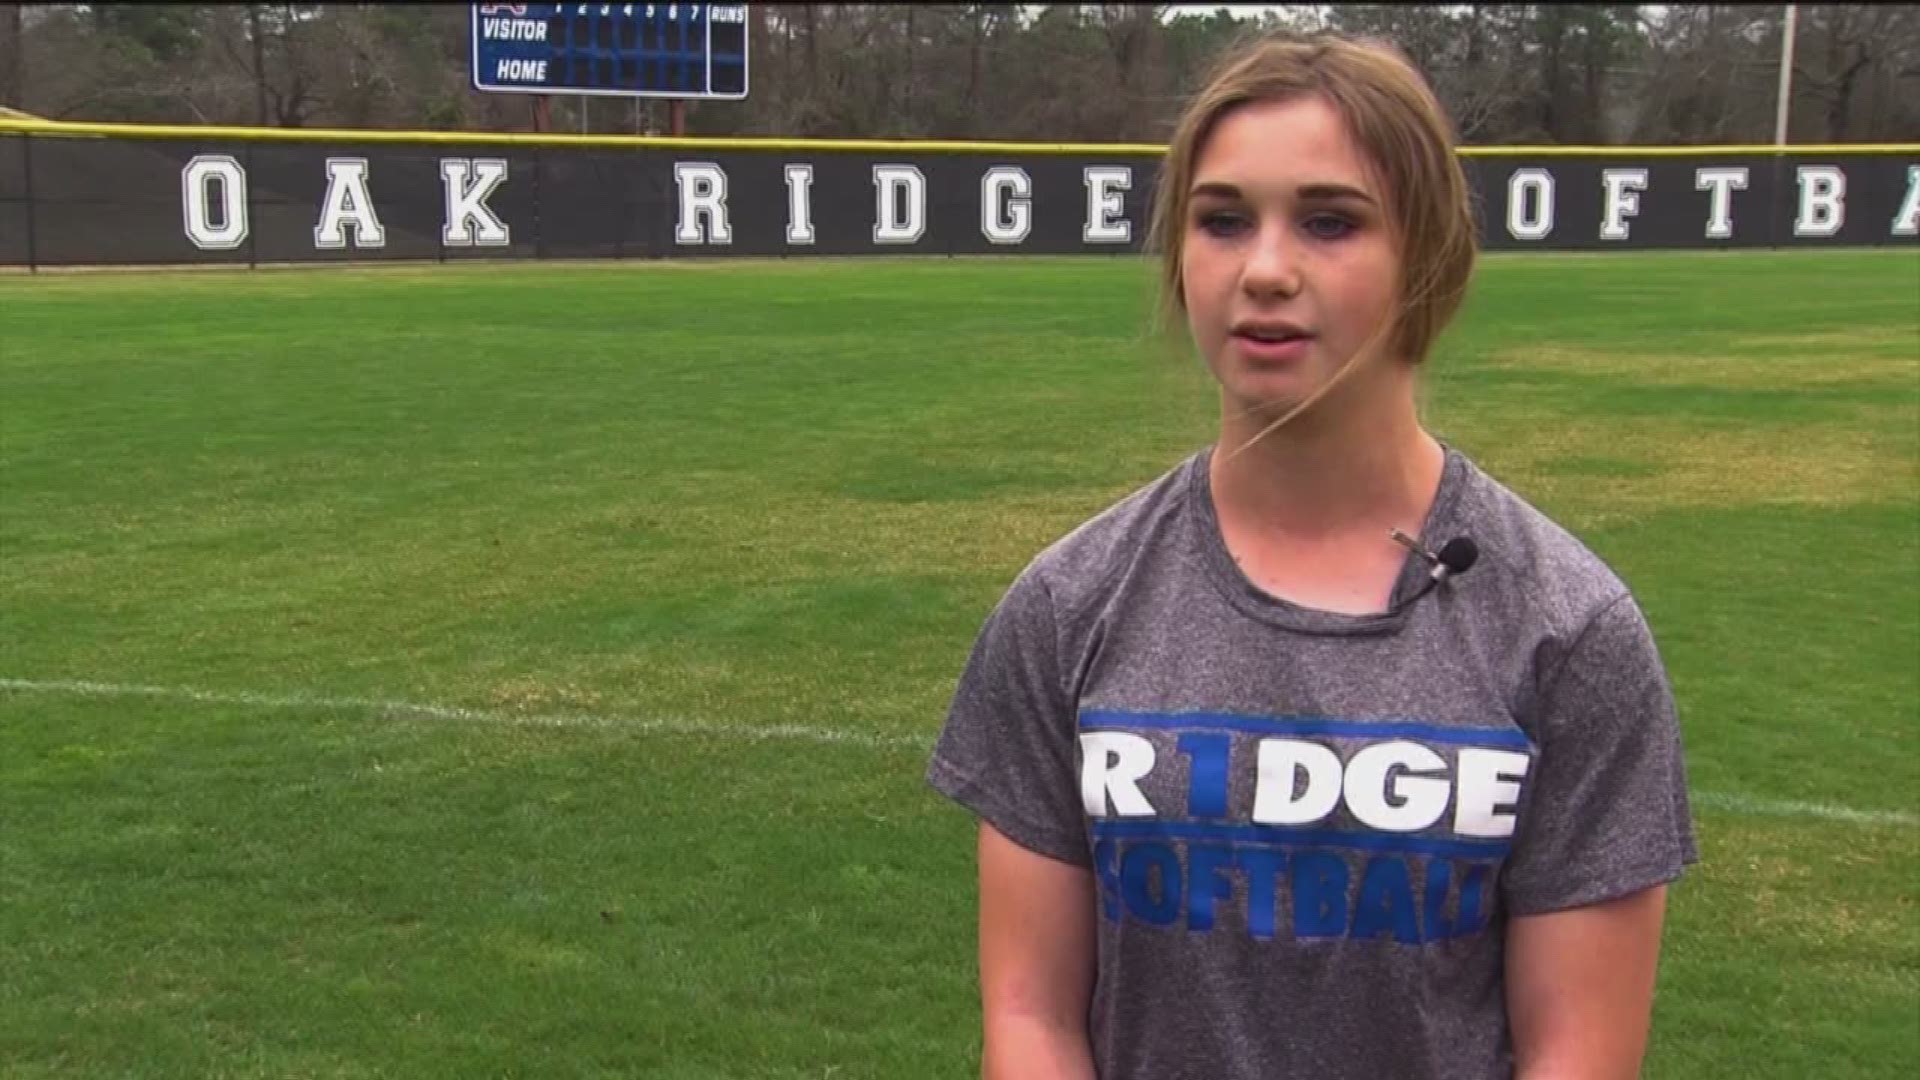 This week's Chevy Spotlight features the softball team at Conroe Ridge High School.